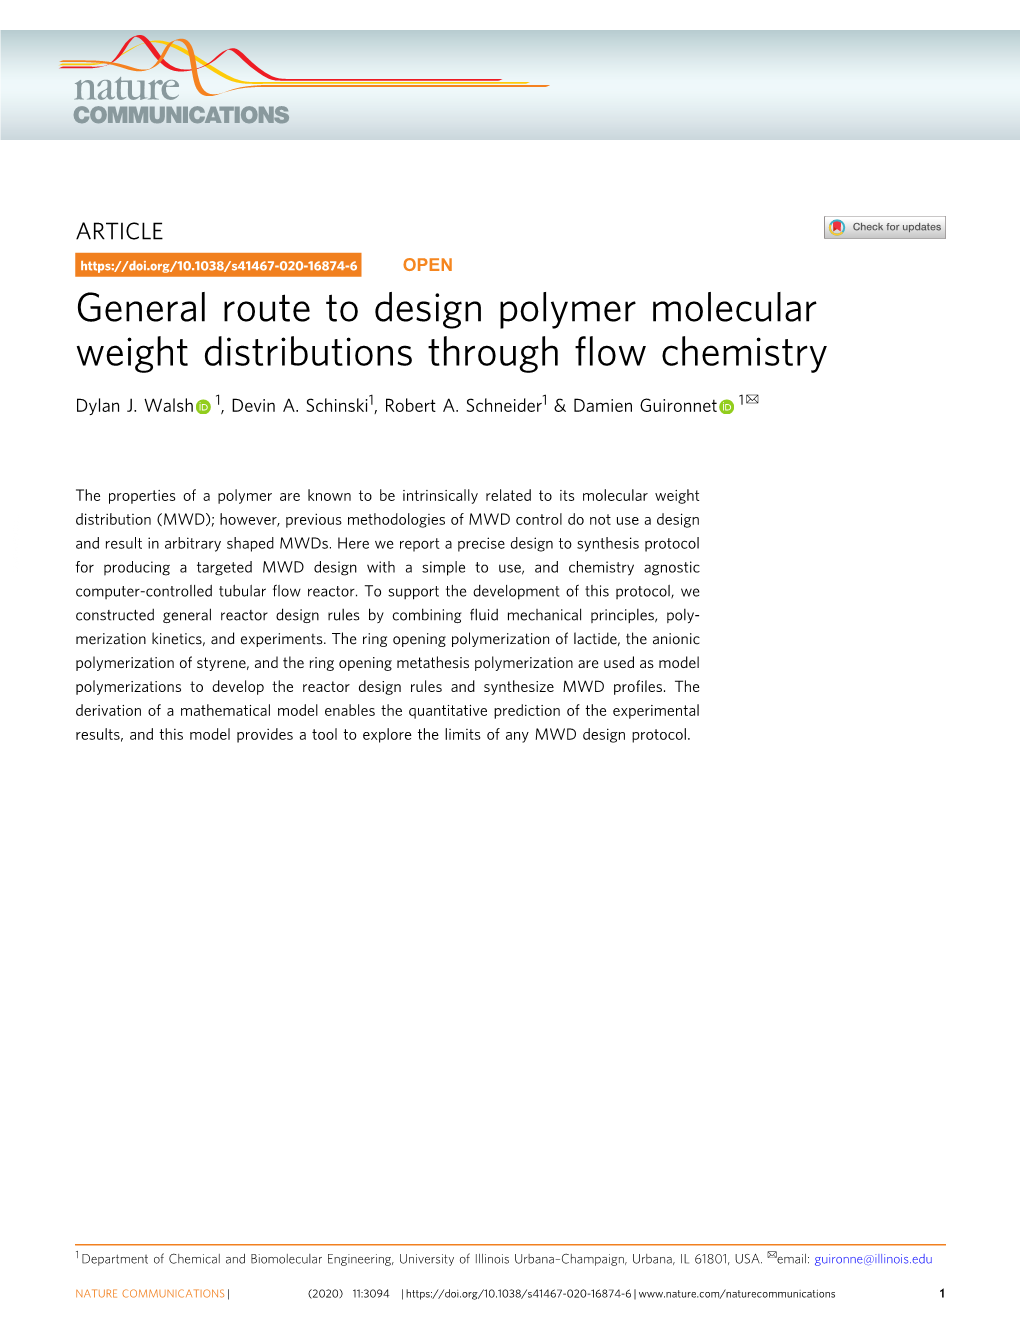 General Route to Design Polymer Molecular Weight Distributions Through Flow Chemistry